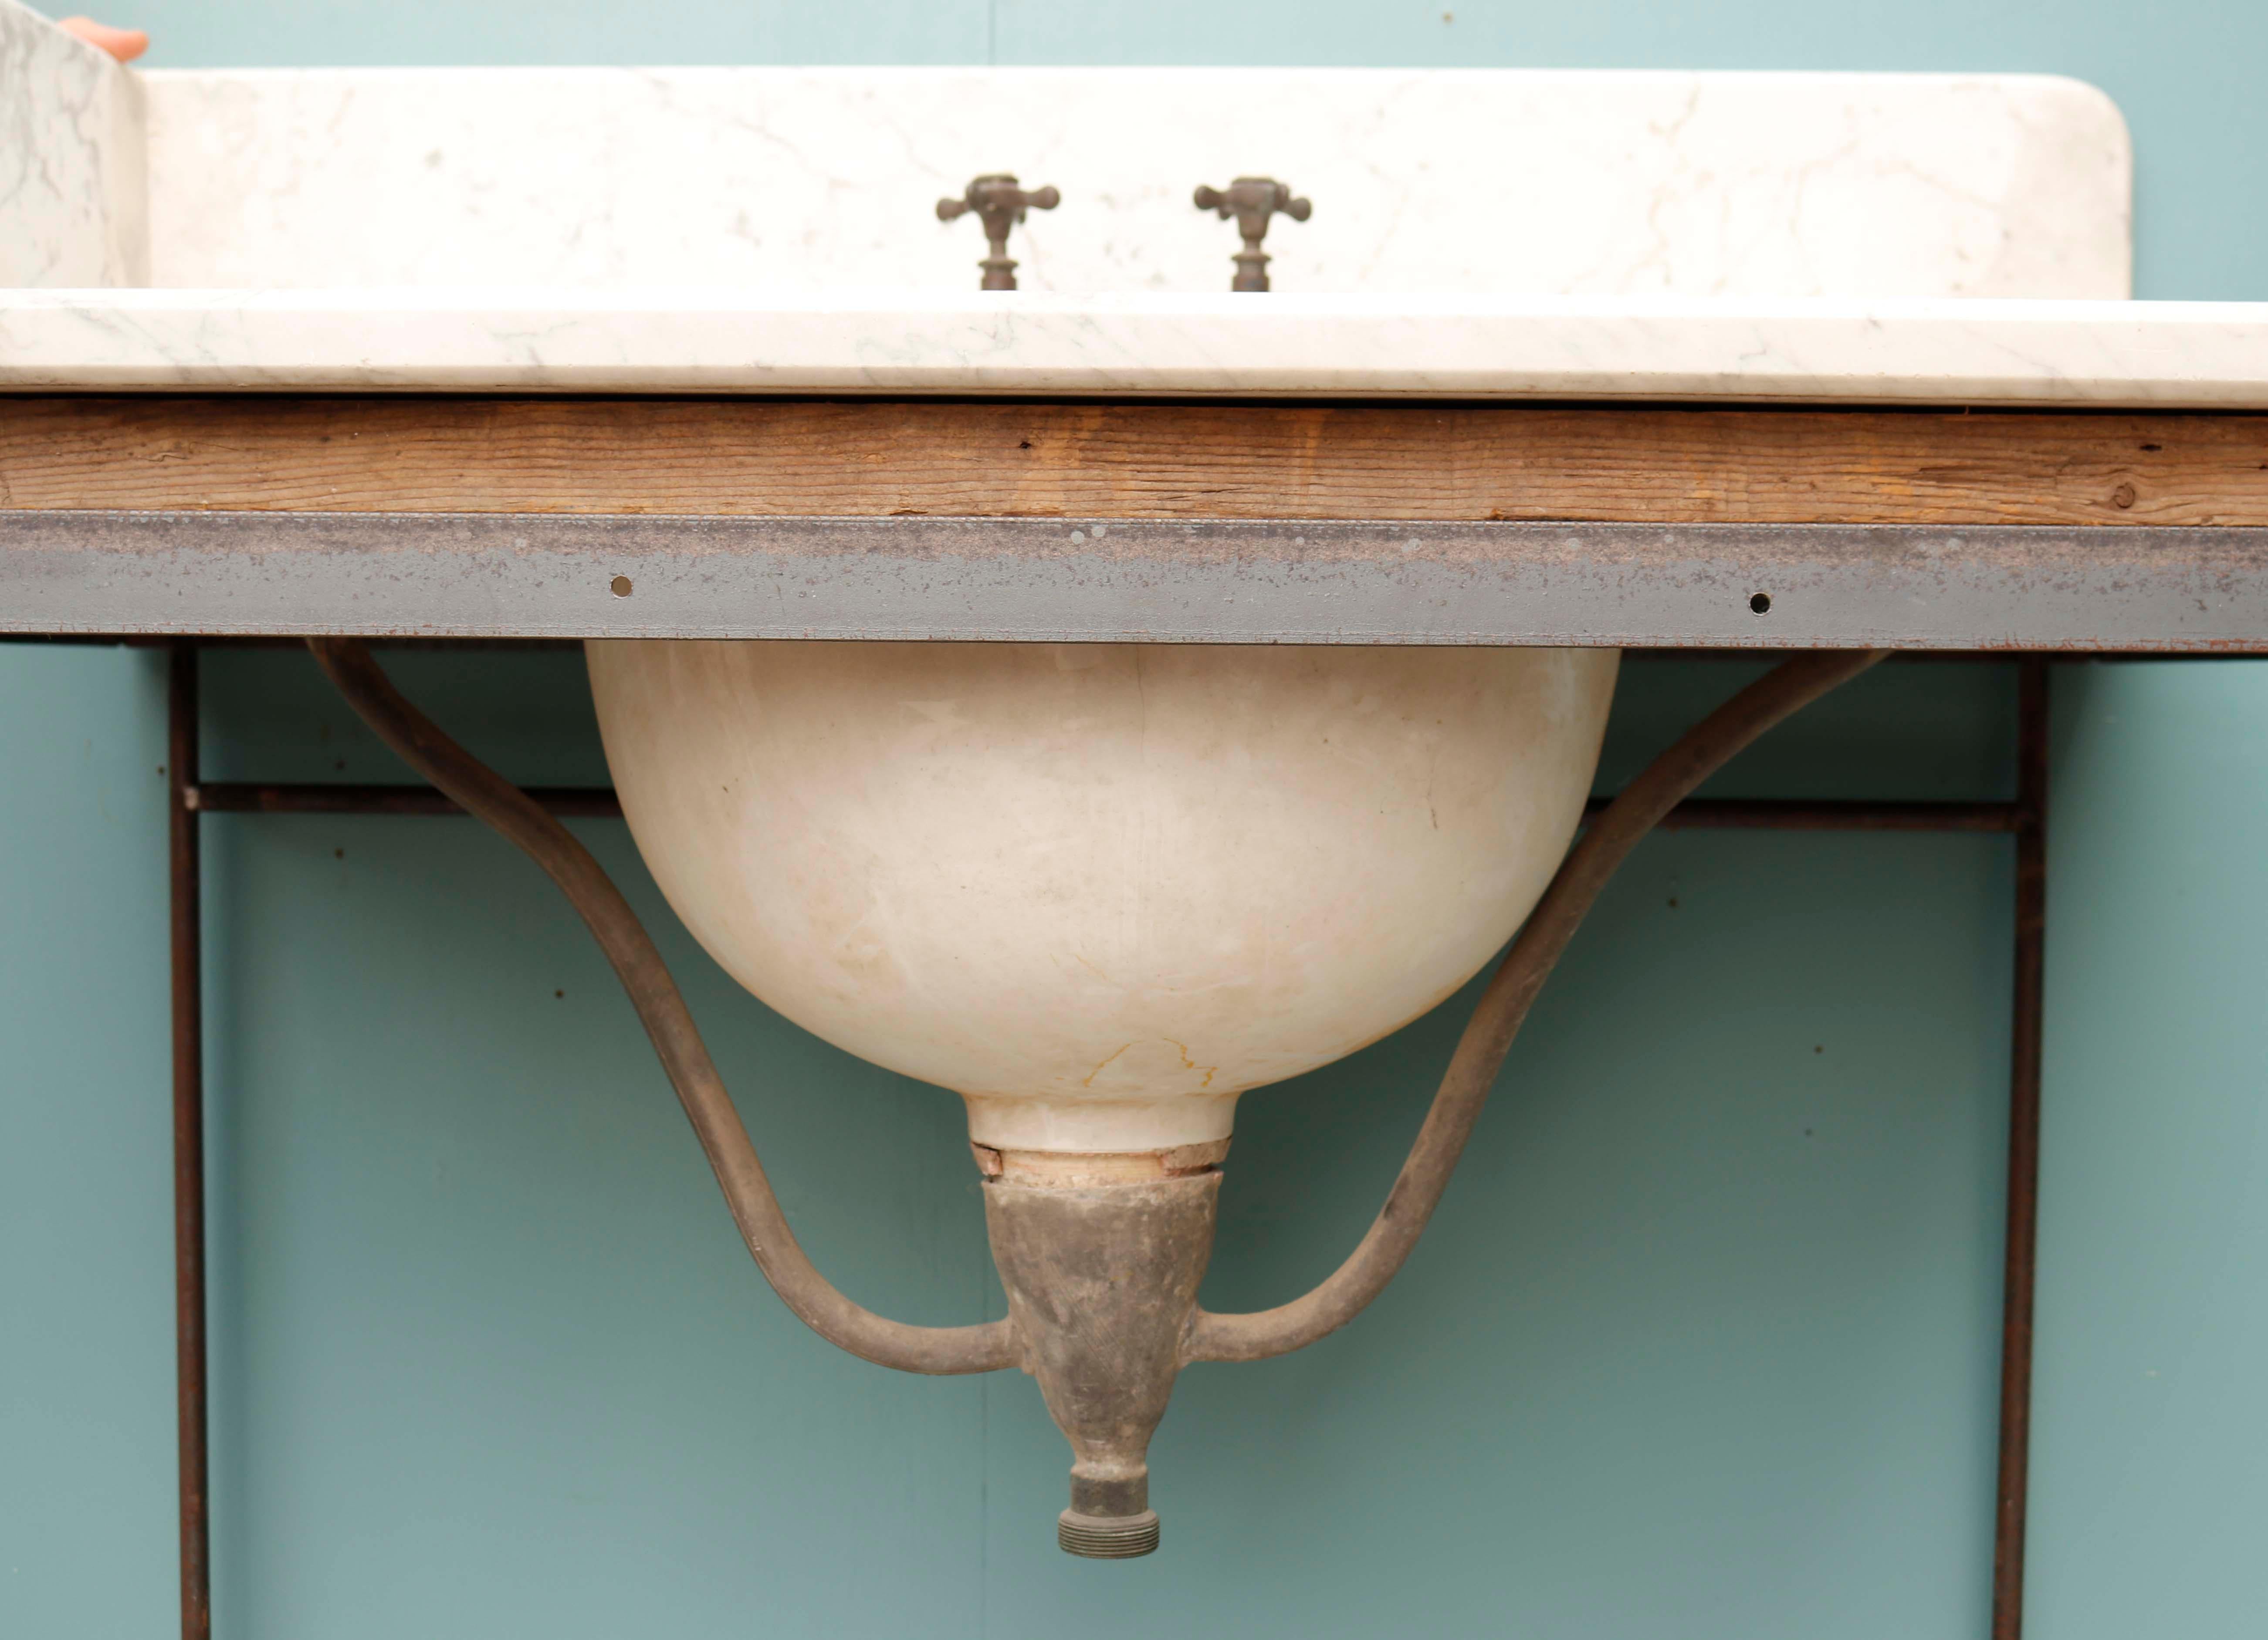 George Jennings marble lift-up sink. A marbleised sink basin designed by Jennings which appeared in the Great Exhibition of 1851 alongside his toilets. This places this products’ production in the mid nineteenth century. The stand is modern, with a